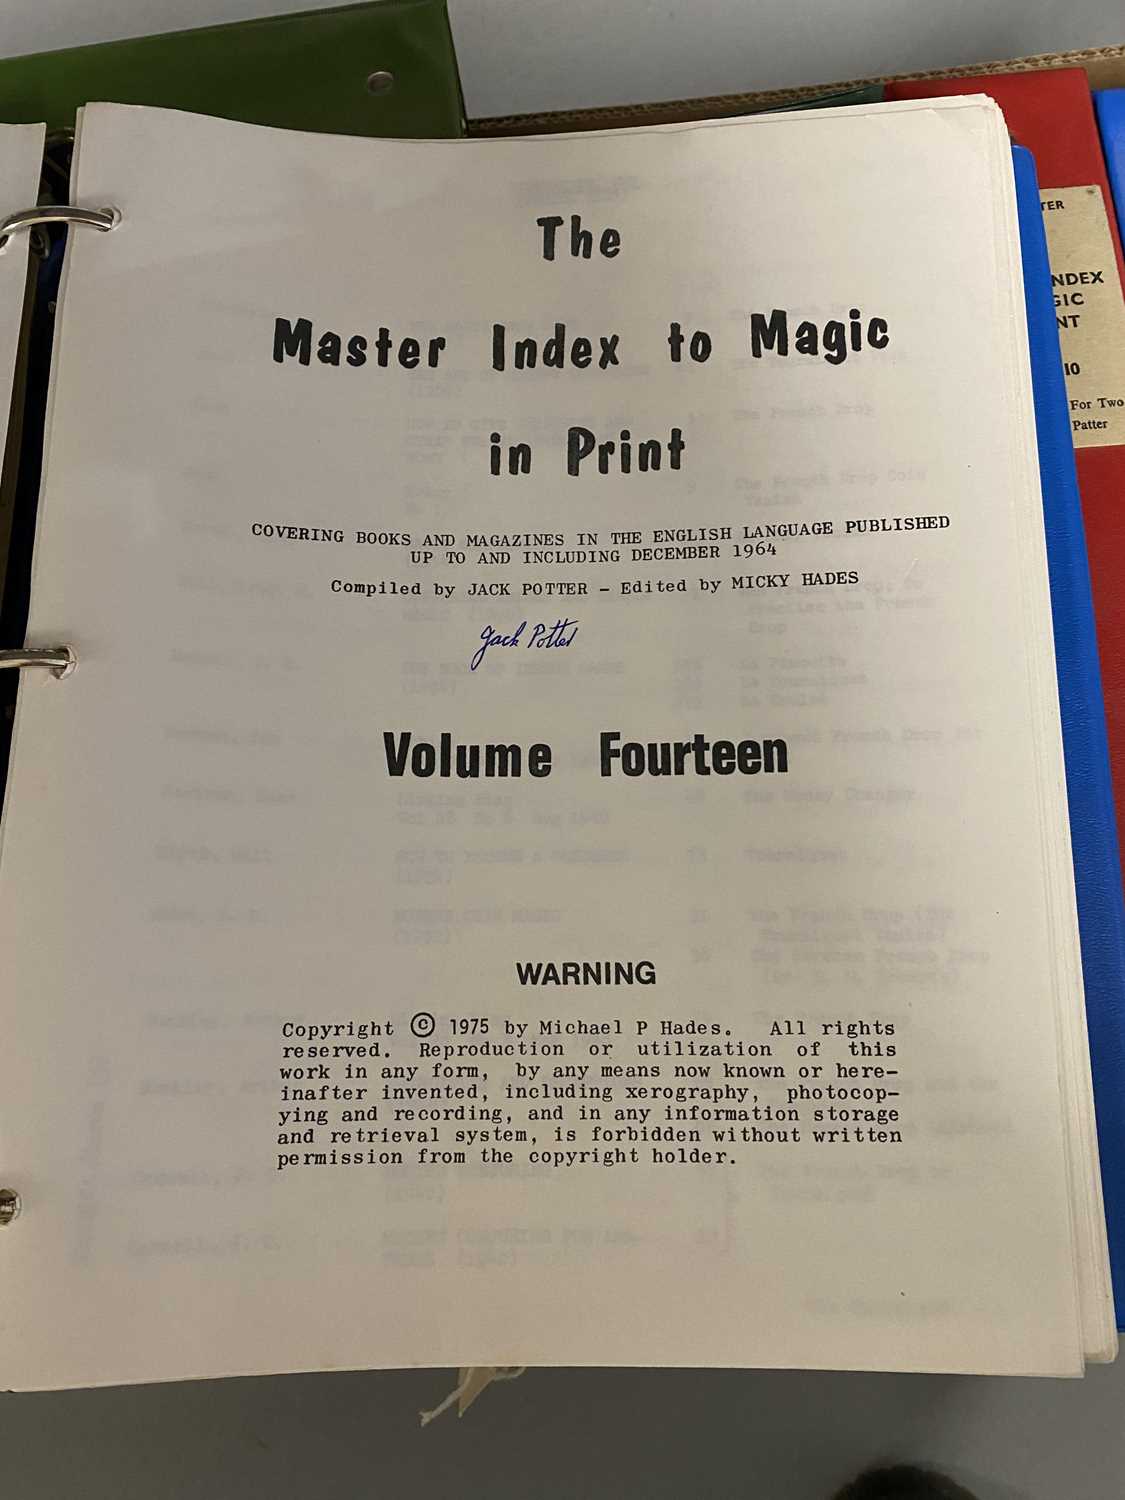 Potter's The Master Index to Magic in Print, and other ephemera relating to magic - Image 13 of 13